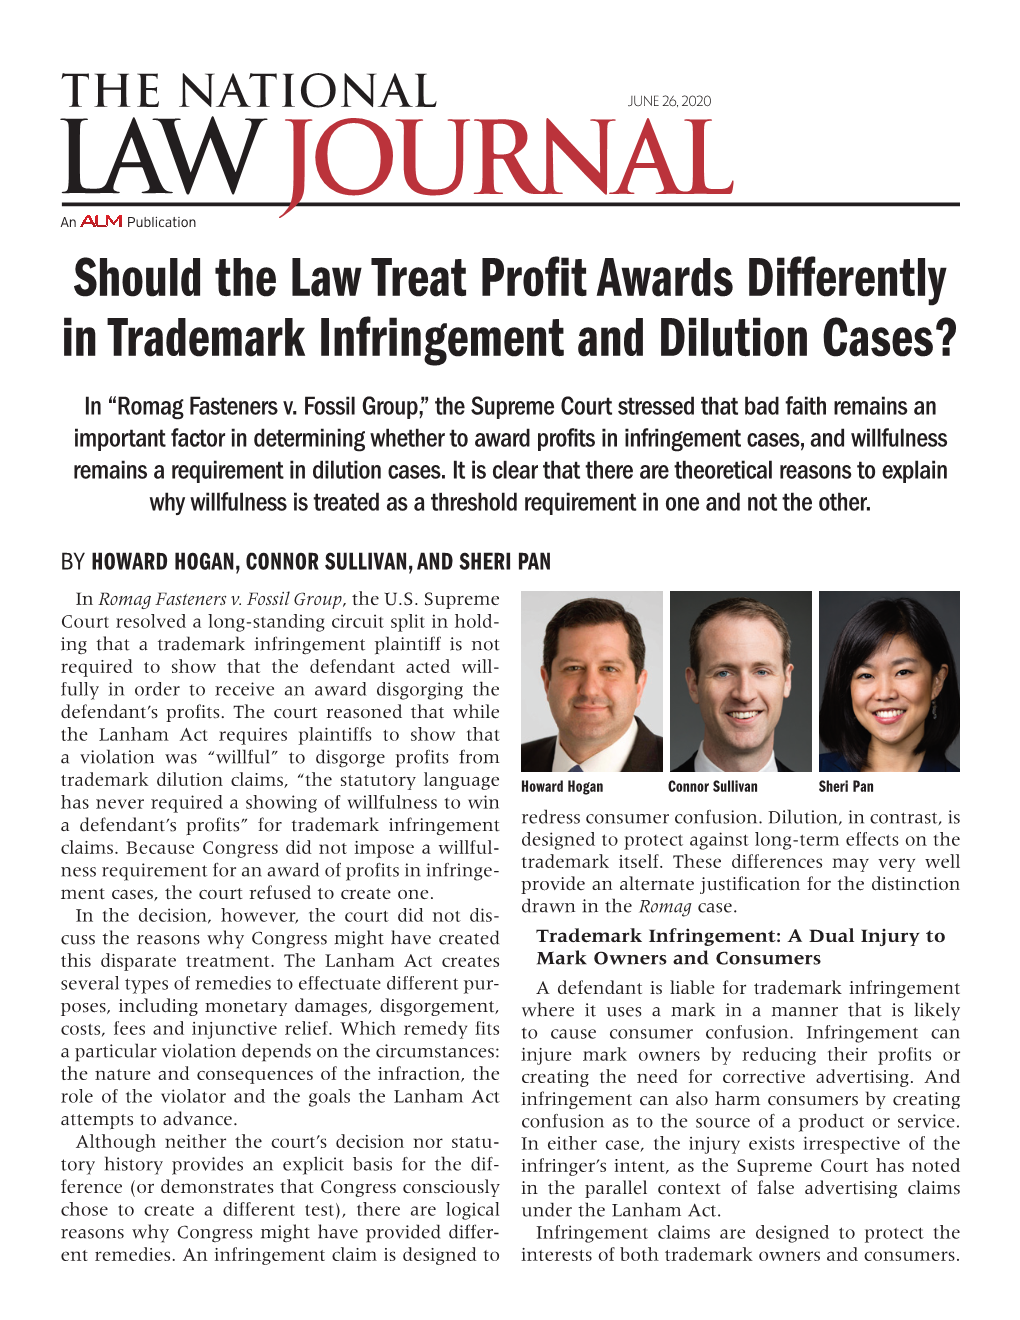 Should the Law Treat Profit Awards Differently in Trademark Infringement and Dilution Cases? in “Romag Fasteners V